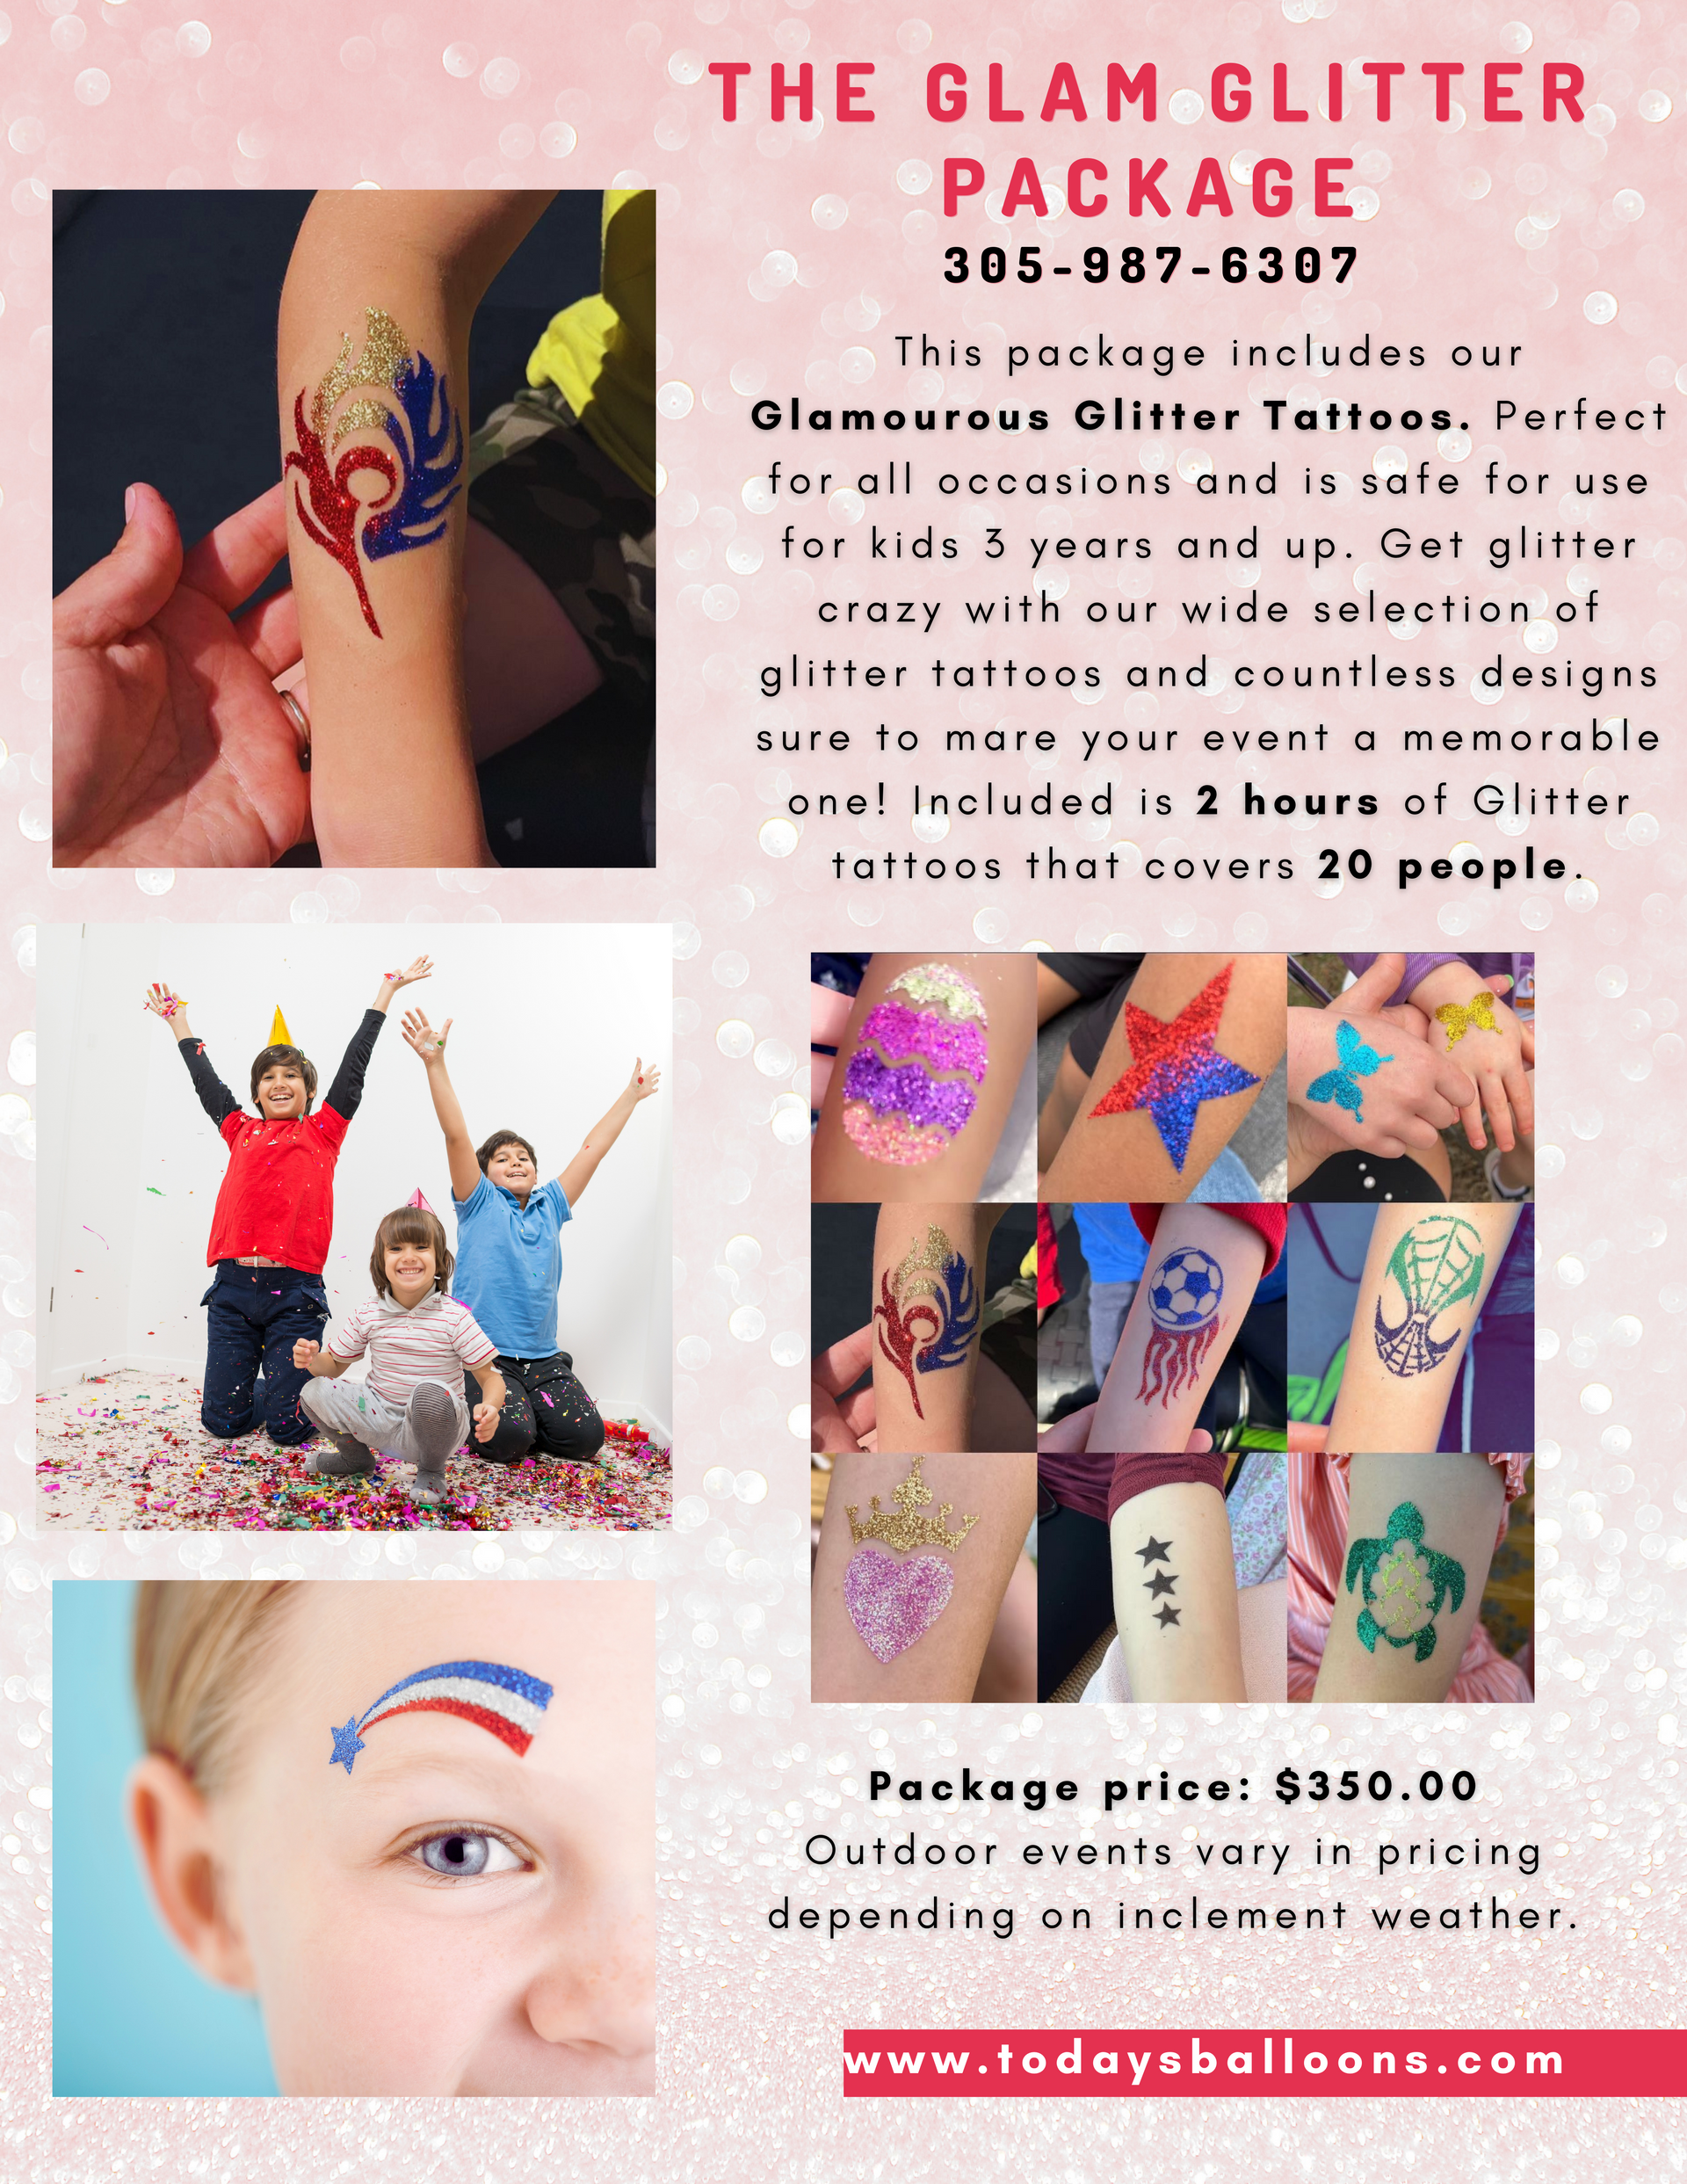 an advertisement for the glam glitter package includes glitter tattoos